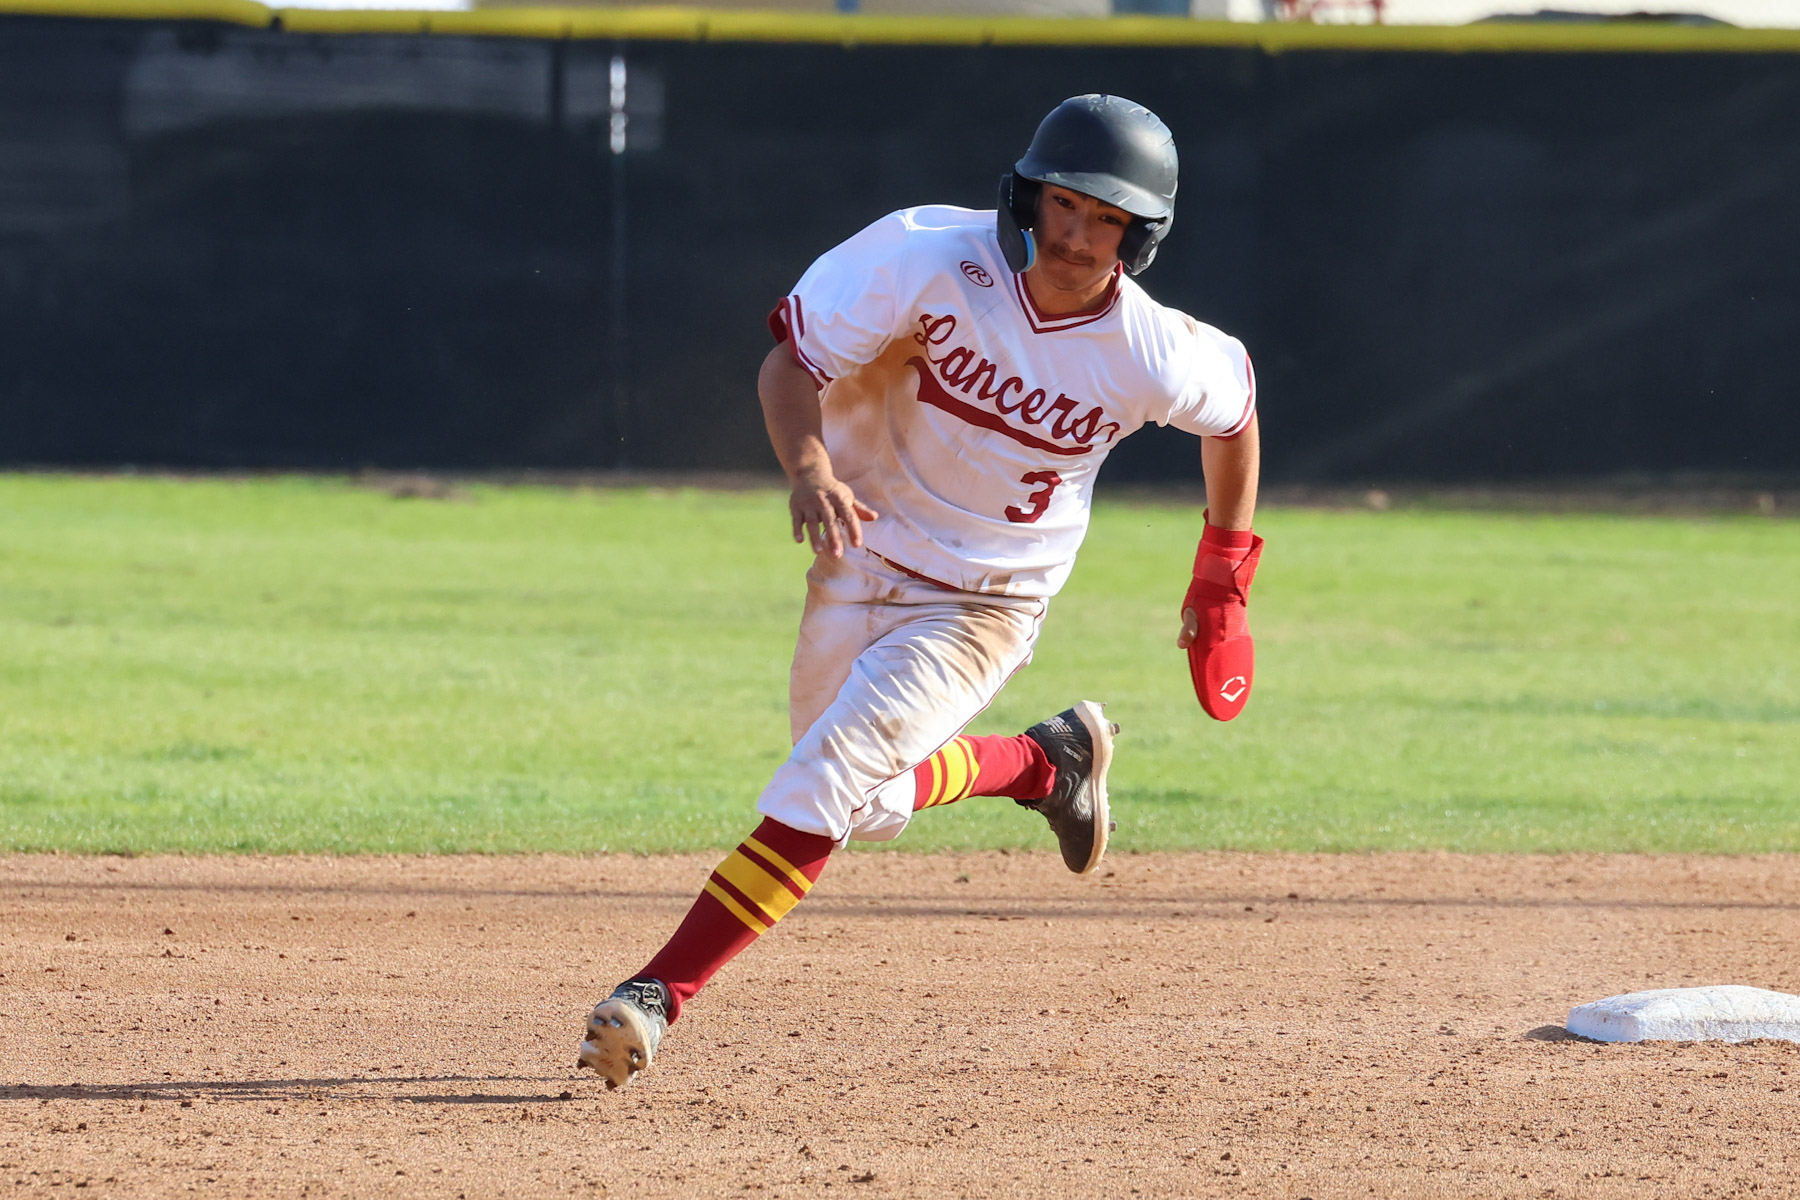 Bryan Richman runs the bases during a recent game (photo by Richard Quinton).